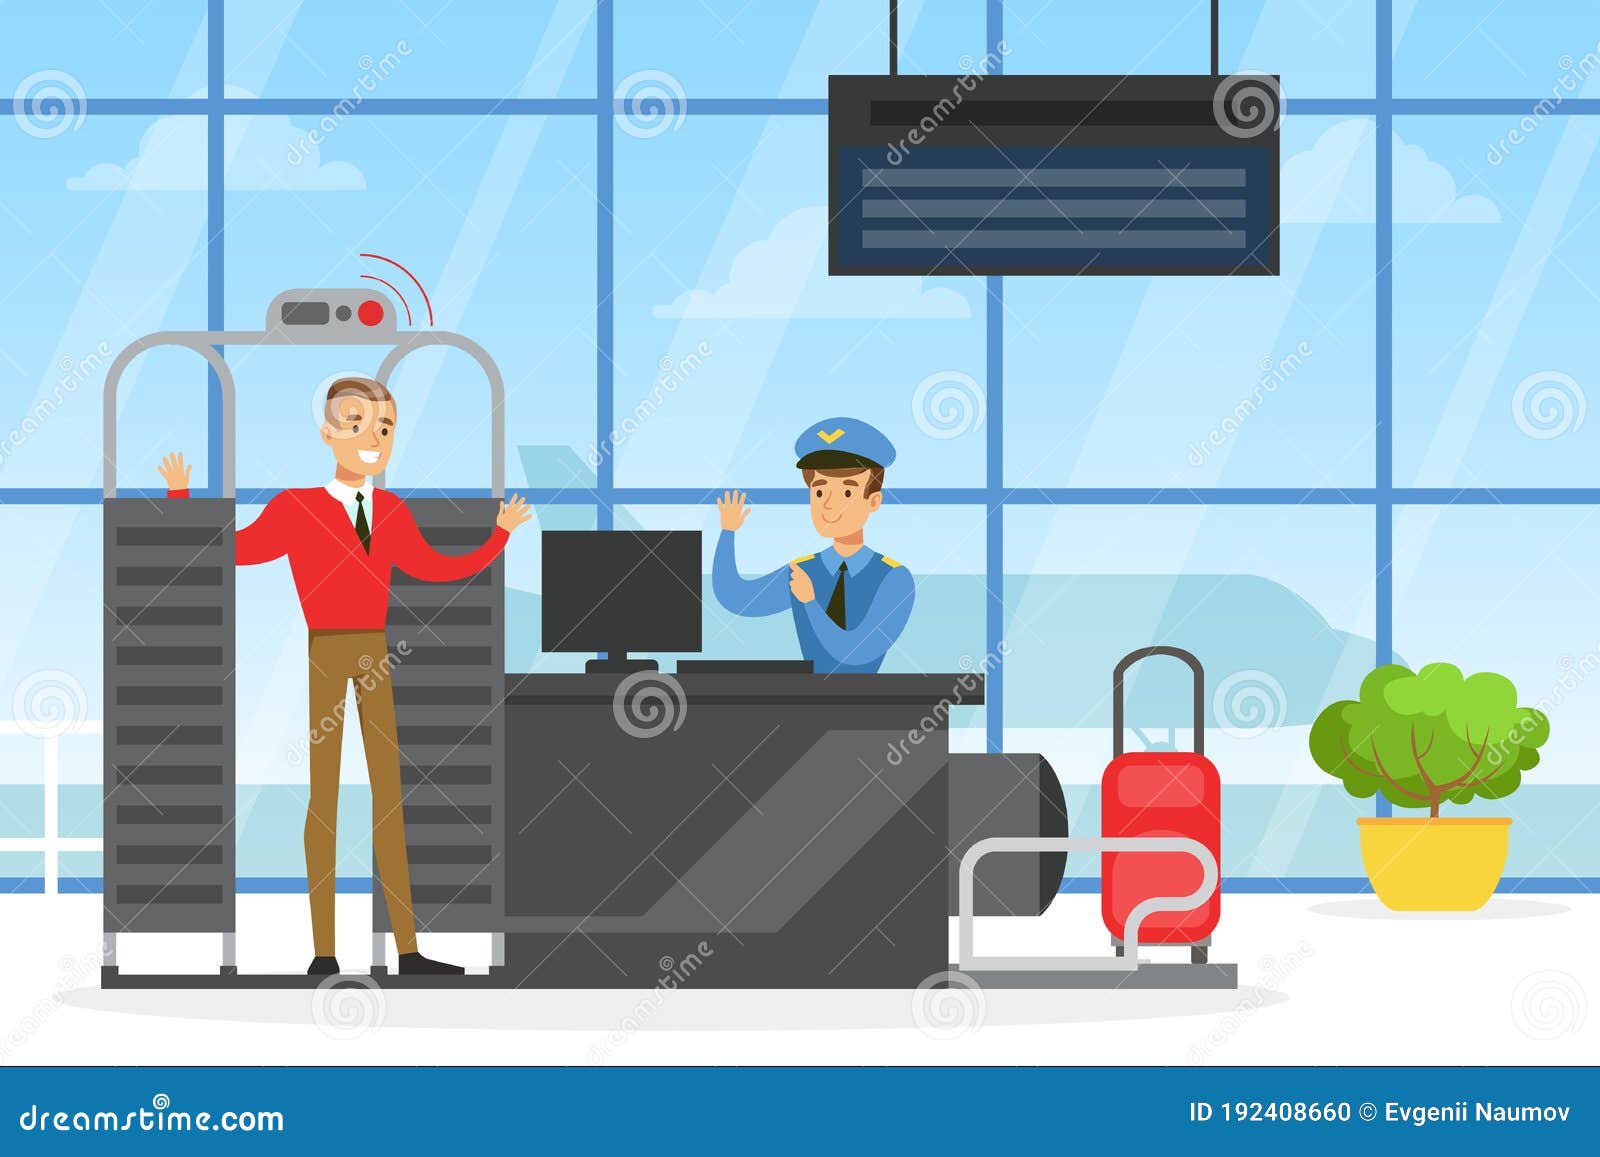 Male Passenger Passing through Scanner at Security Check Point in Airport,  People Travelling by Plane with Luggage Stock Vector - Illustration of  cheerful, arrival: 192408660